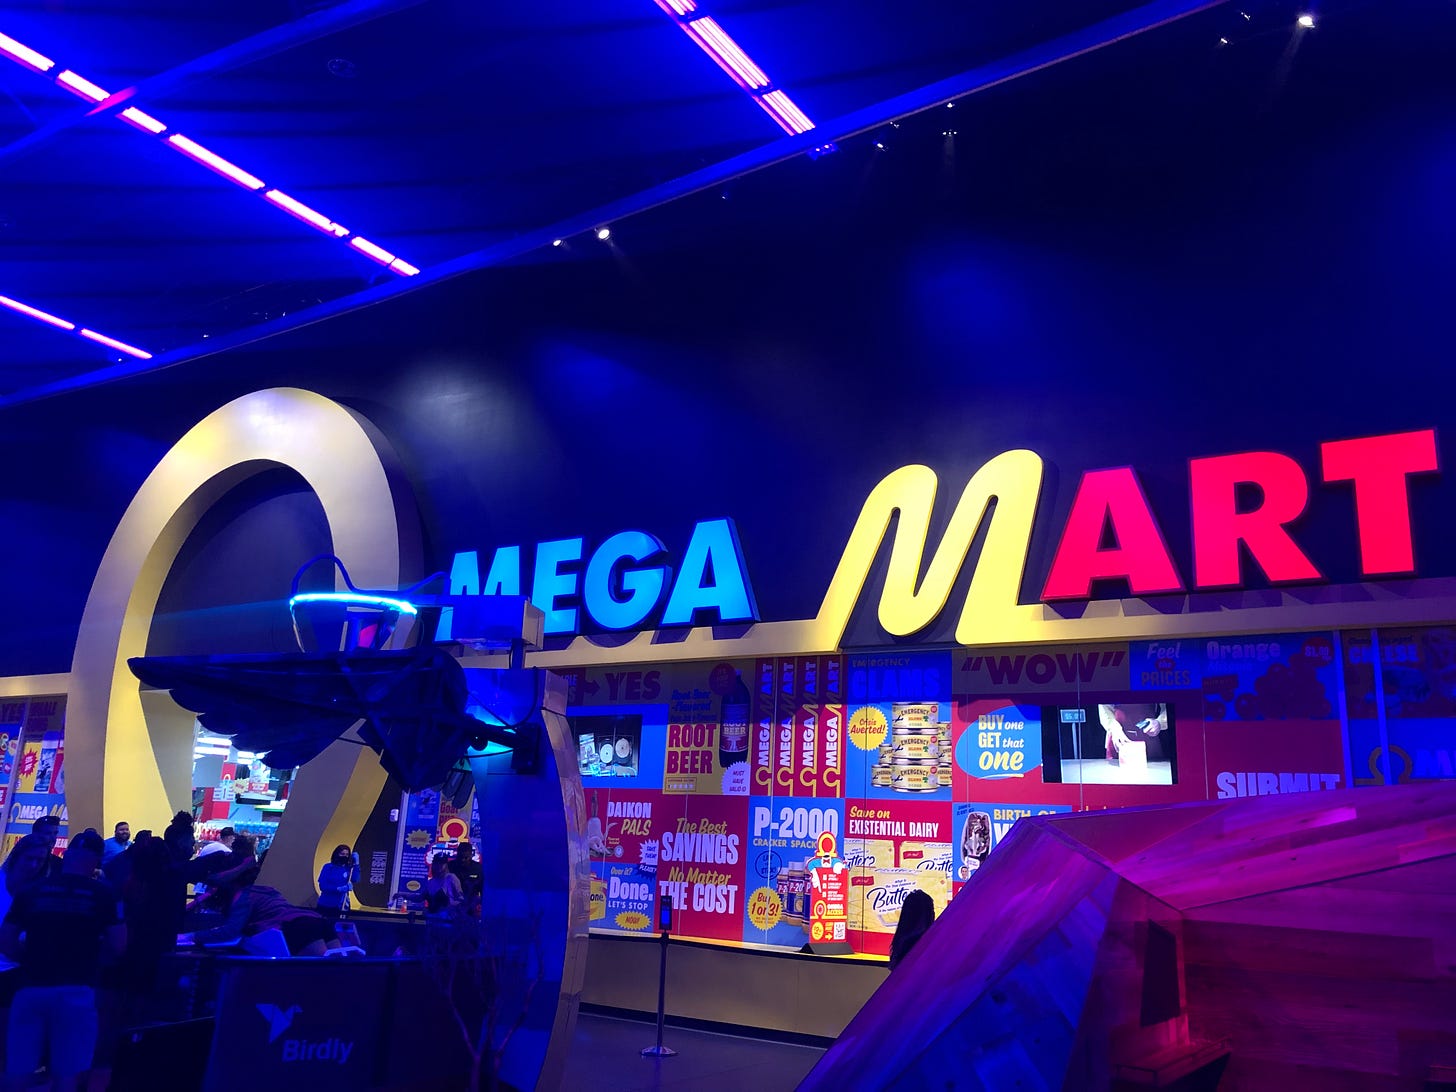 Image: The exterior of Meow Wolf's Omega Mart